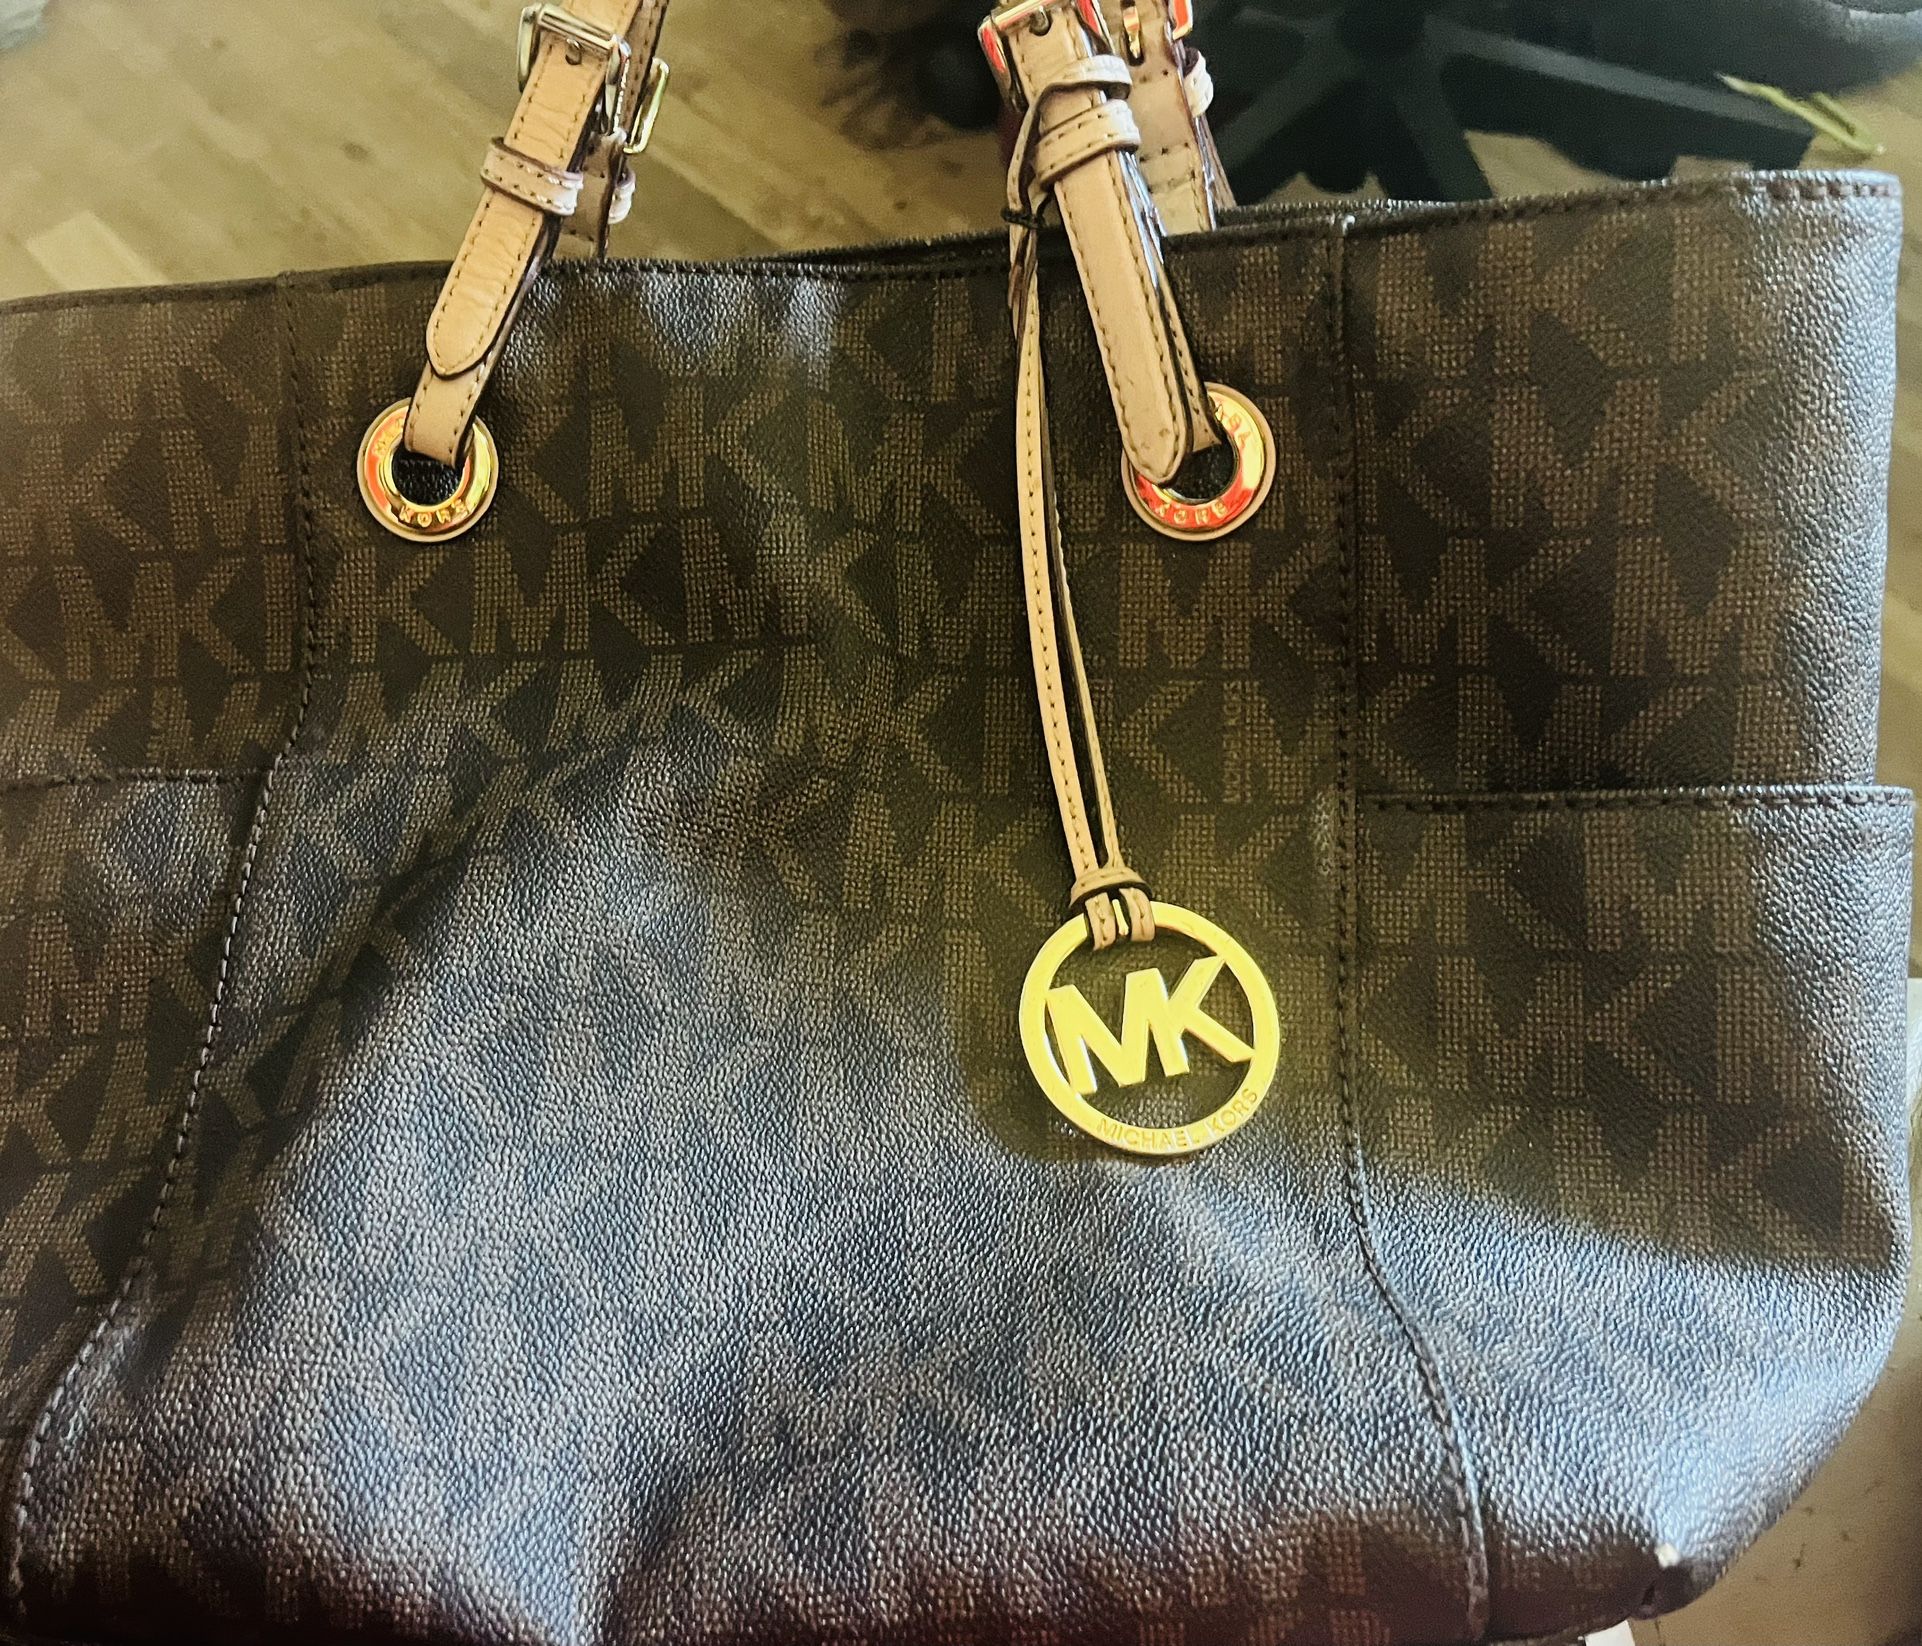 Micheal Kors logo tote bag (authentic)